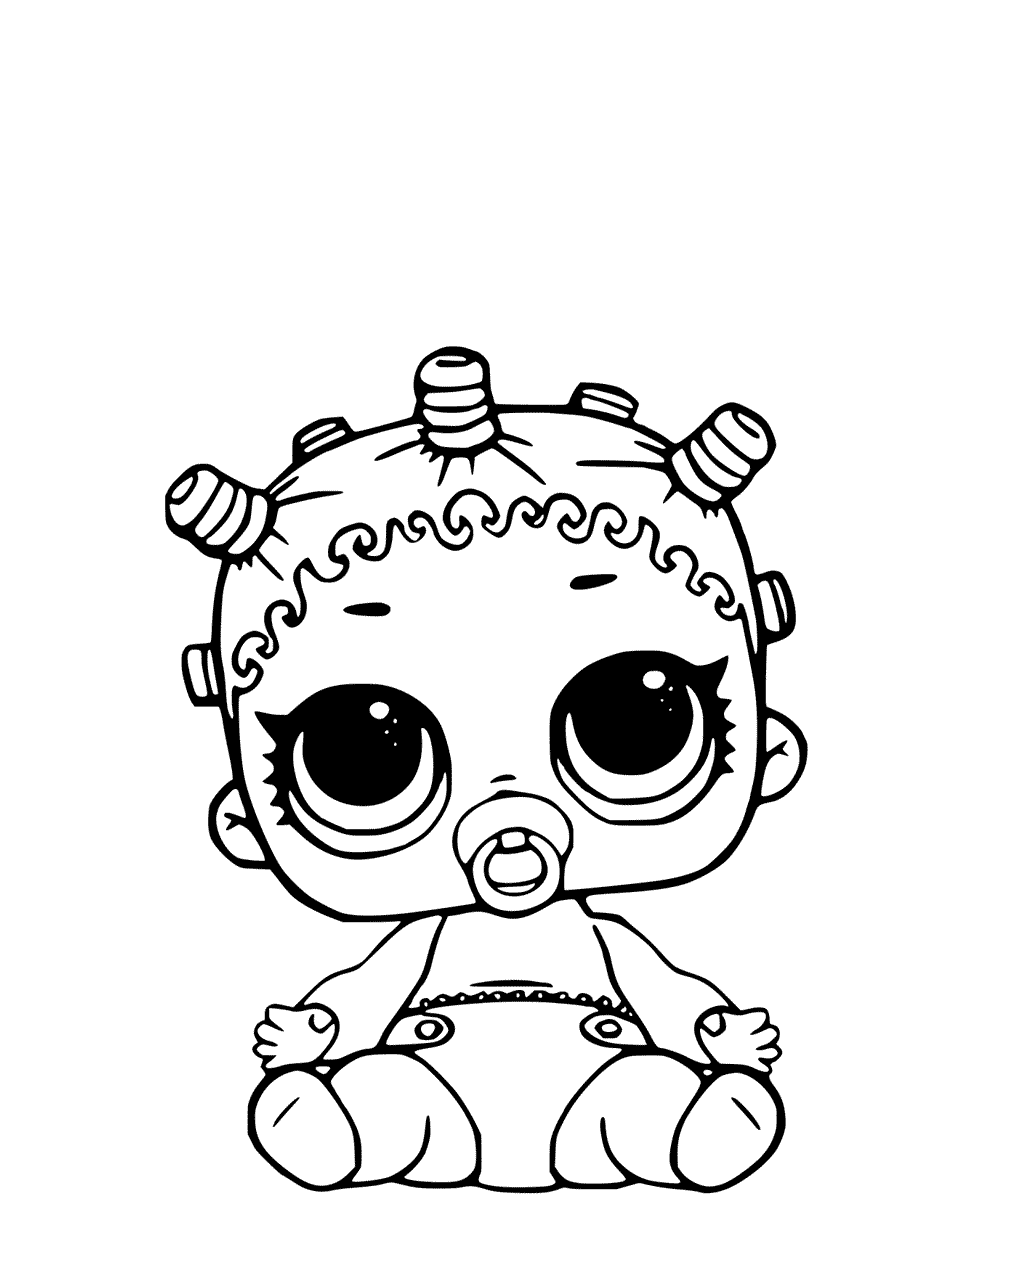 Lil Roller Sk8ter Coloring Page LOL Doll